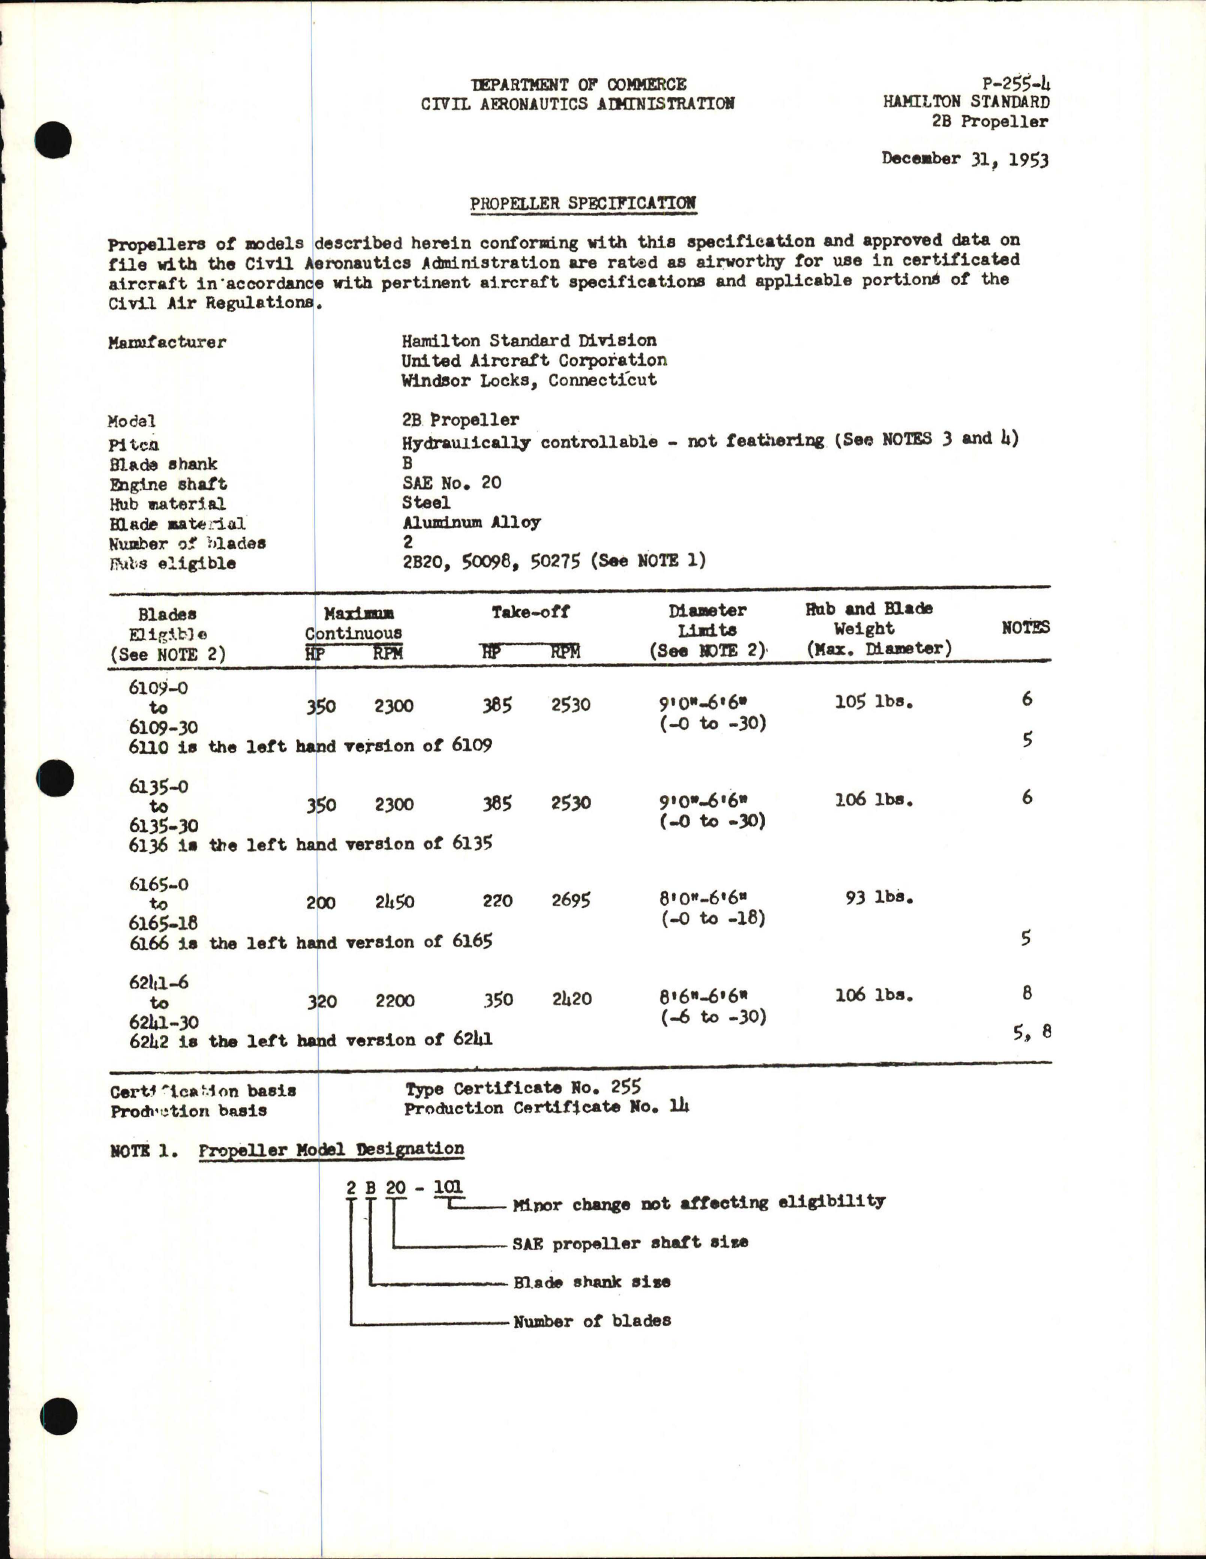 Sample page 1 from AirCorps Library document: 2B